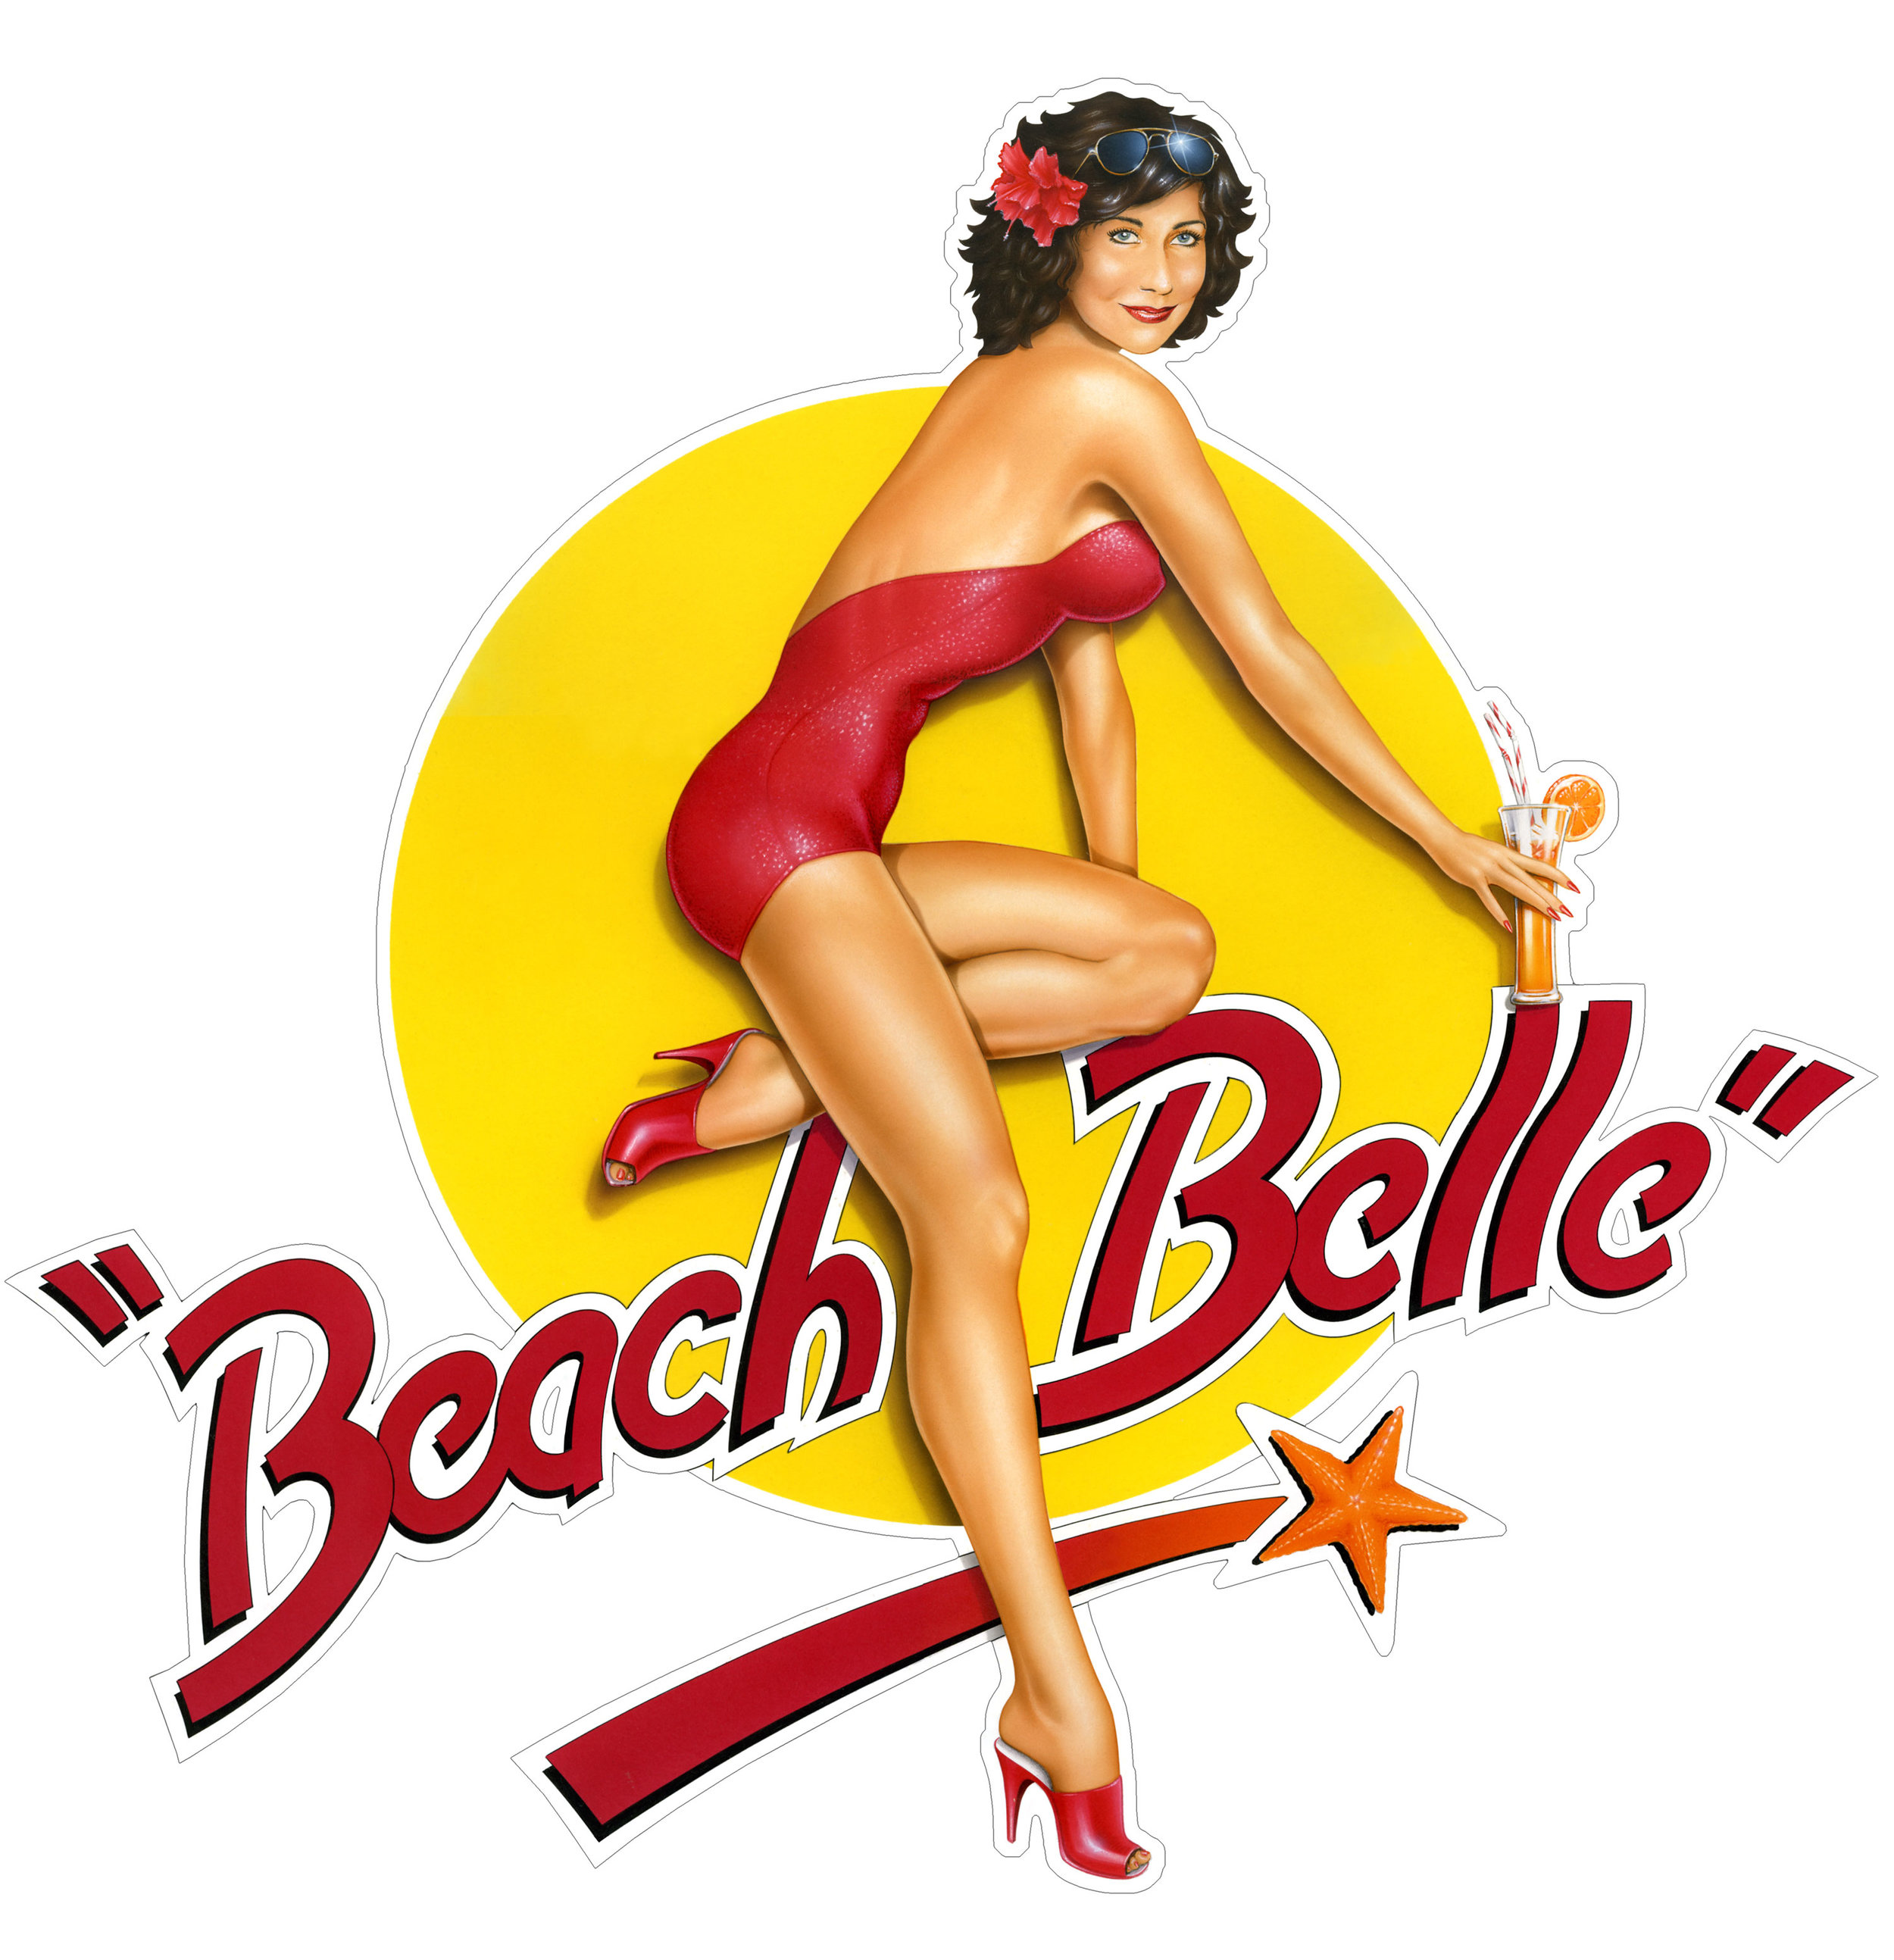  I illustrated 'Beach Belle' and 'Bar-Belle Bomber' for aviators Barbel Abela and her wing man Len Perry.   